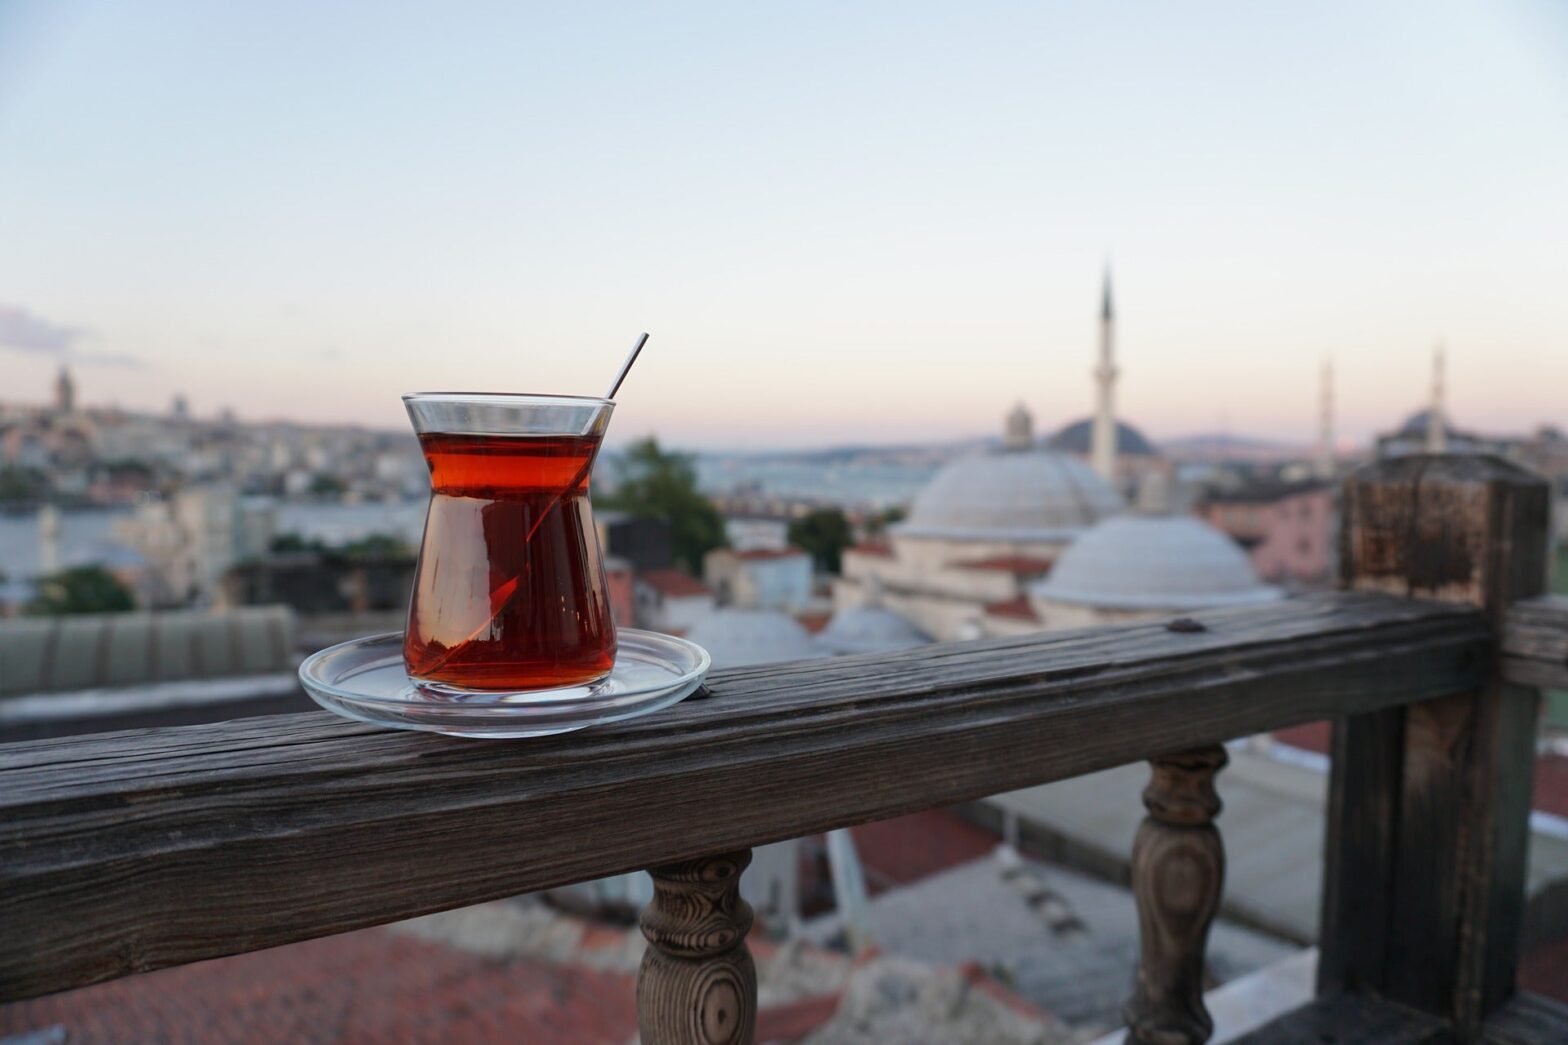  Basic Turkish phrases to survive your first Turkish interaction